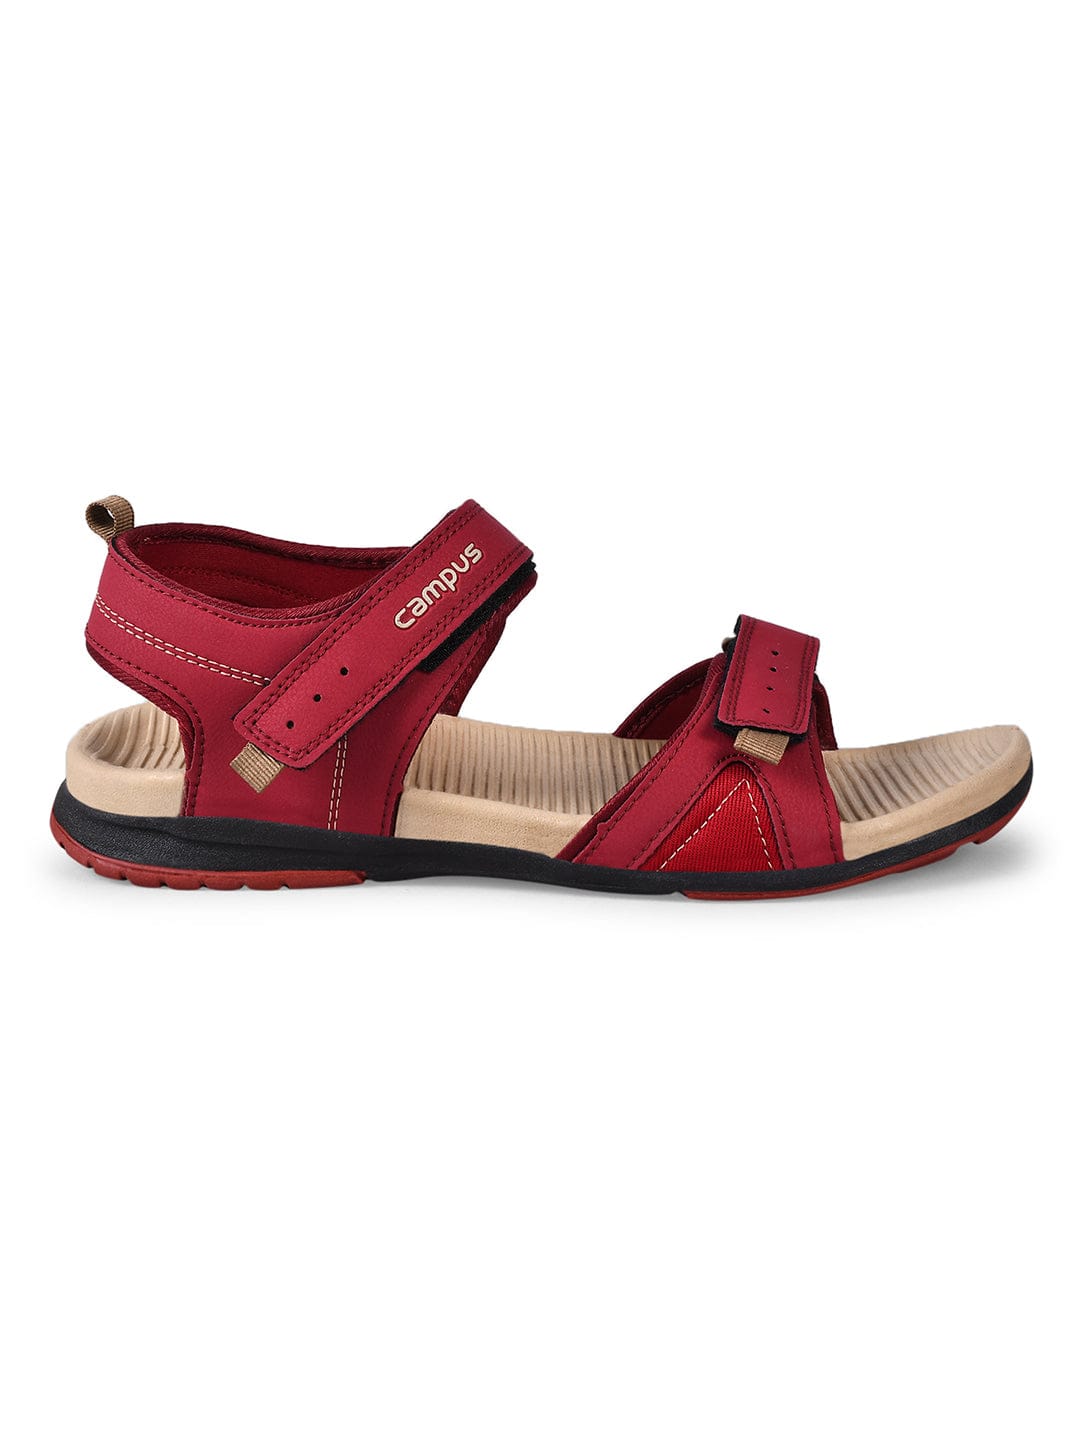 Buy Blue & Red Sandals for Men by CAMPUS Online | Ajio.com